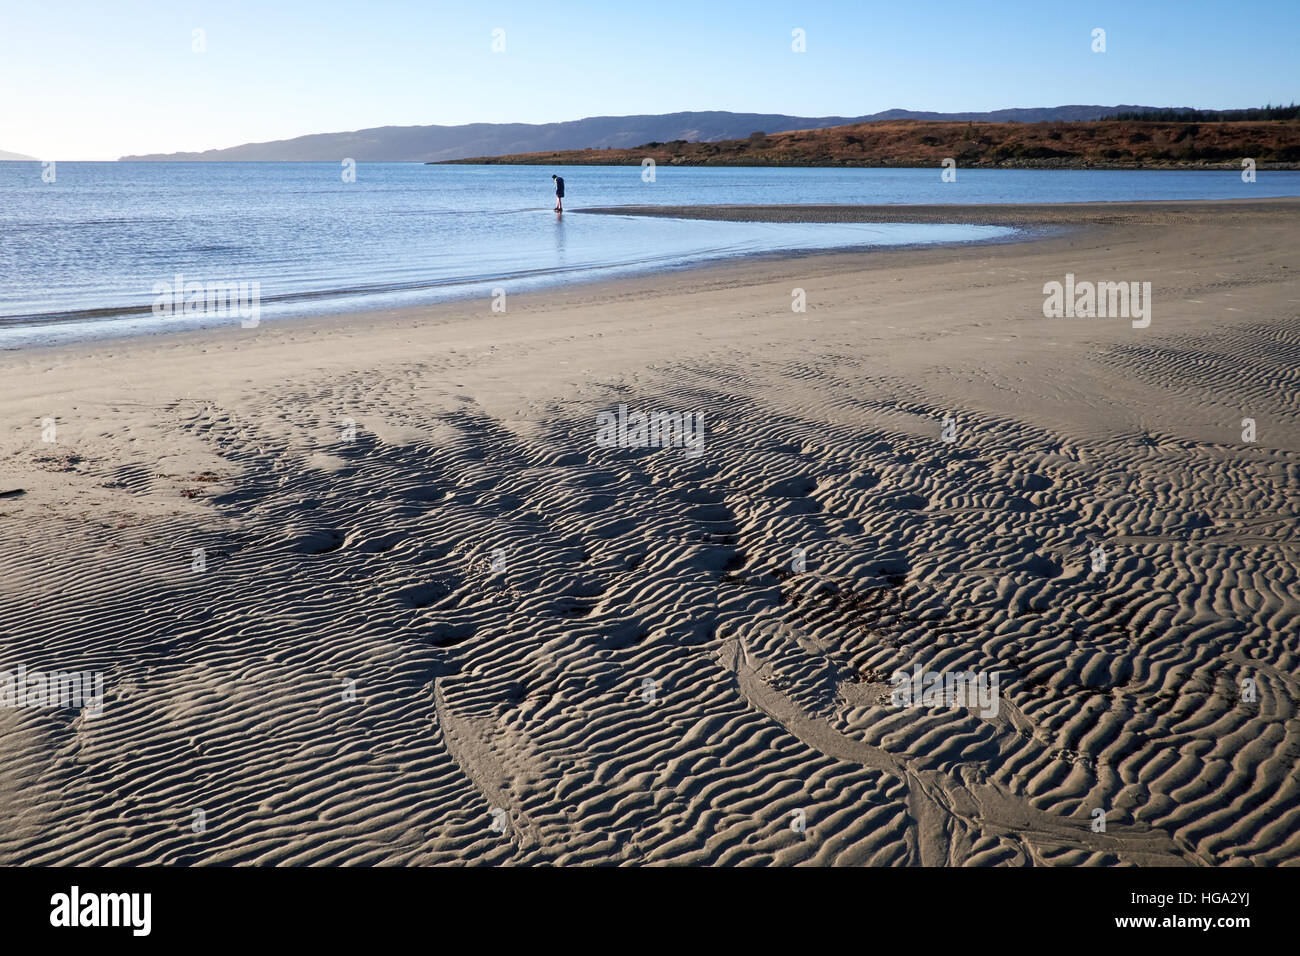 Kilbride bay sands at low tide showing the sand banks, surrounding hills and a clear sky. A figure stands in the distance. Stock Photo